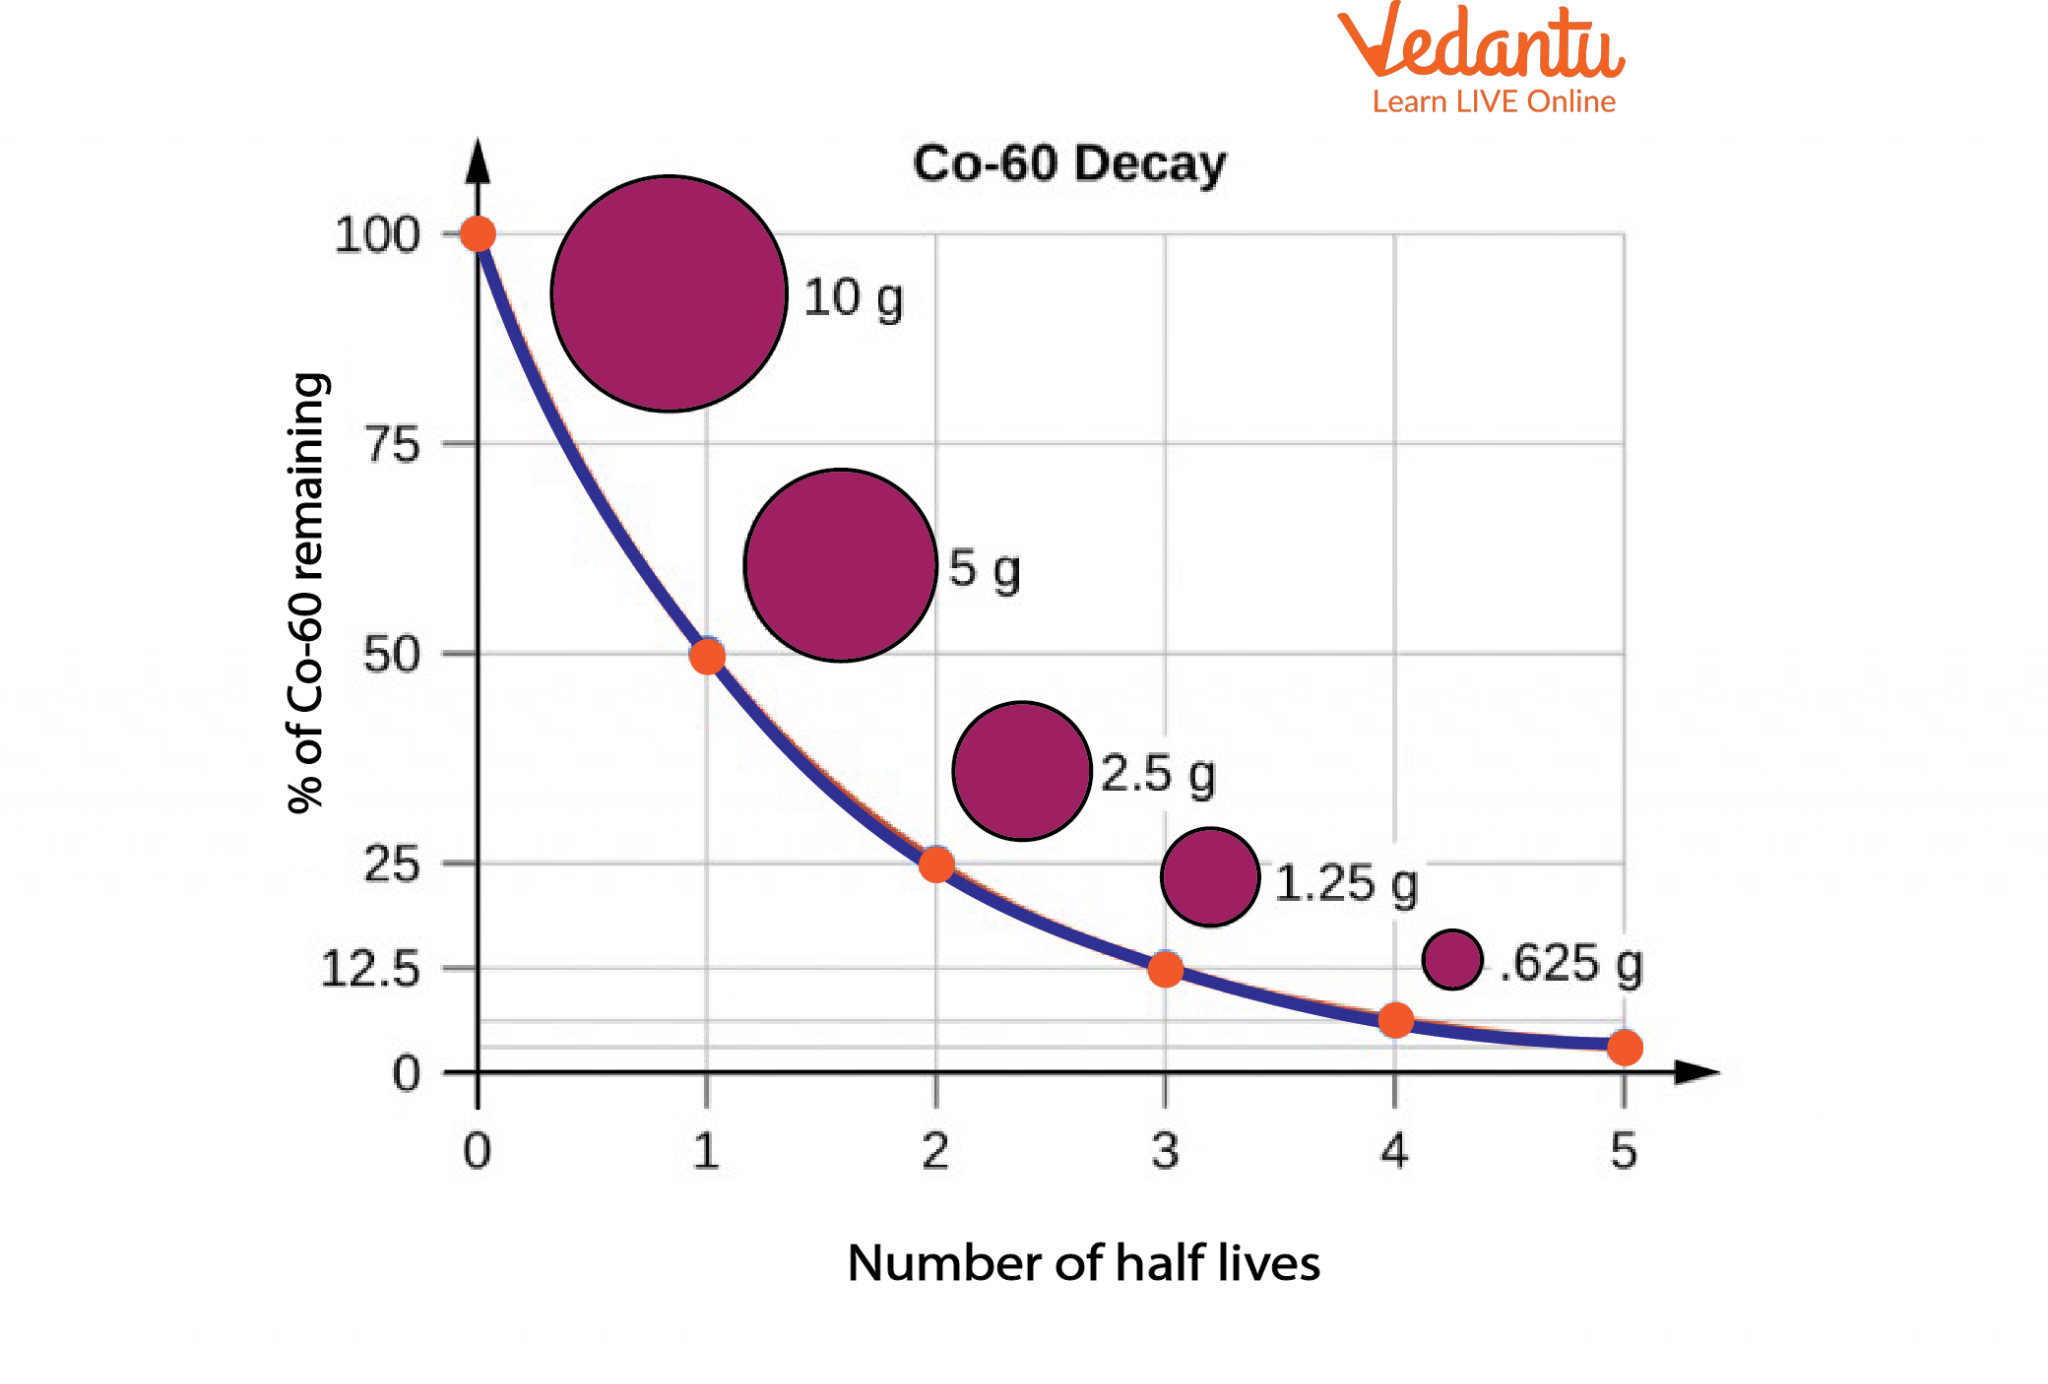 Radioactive Decay and Half-Life of Co-60